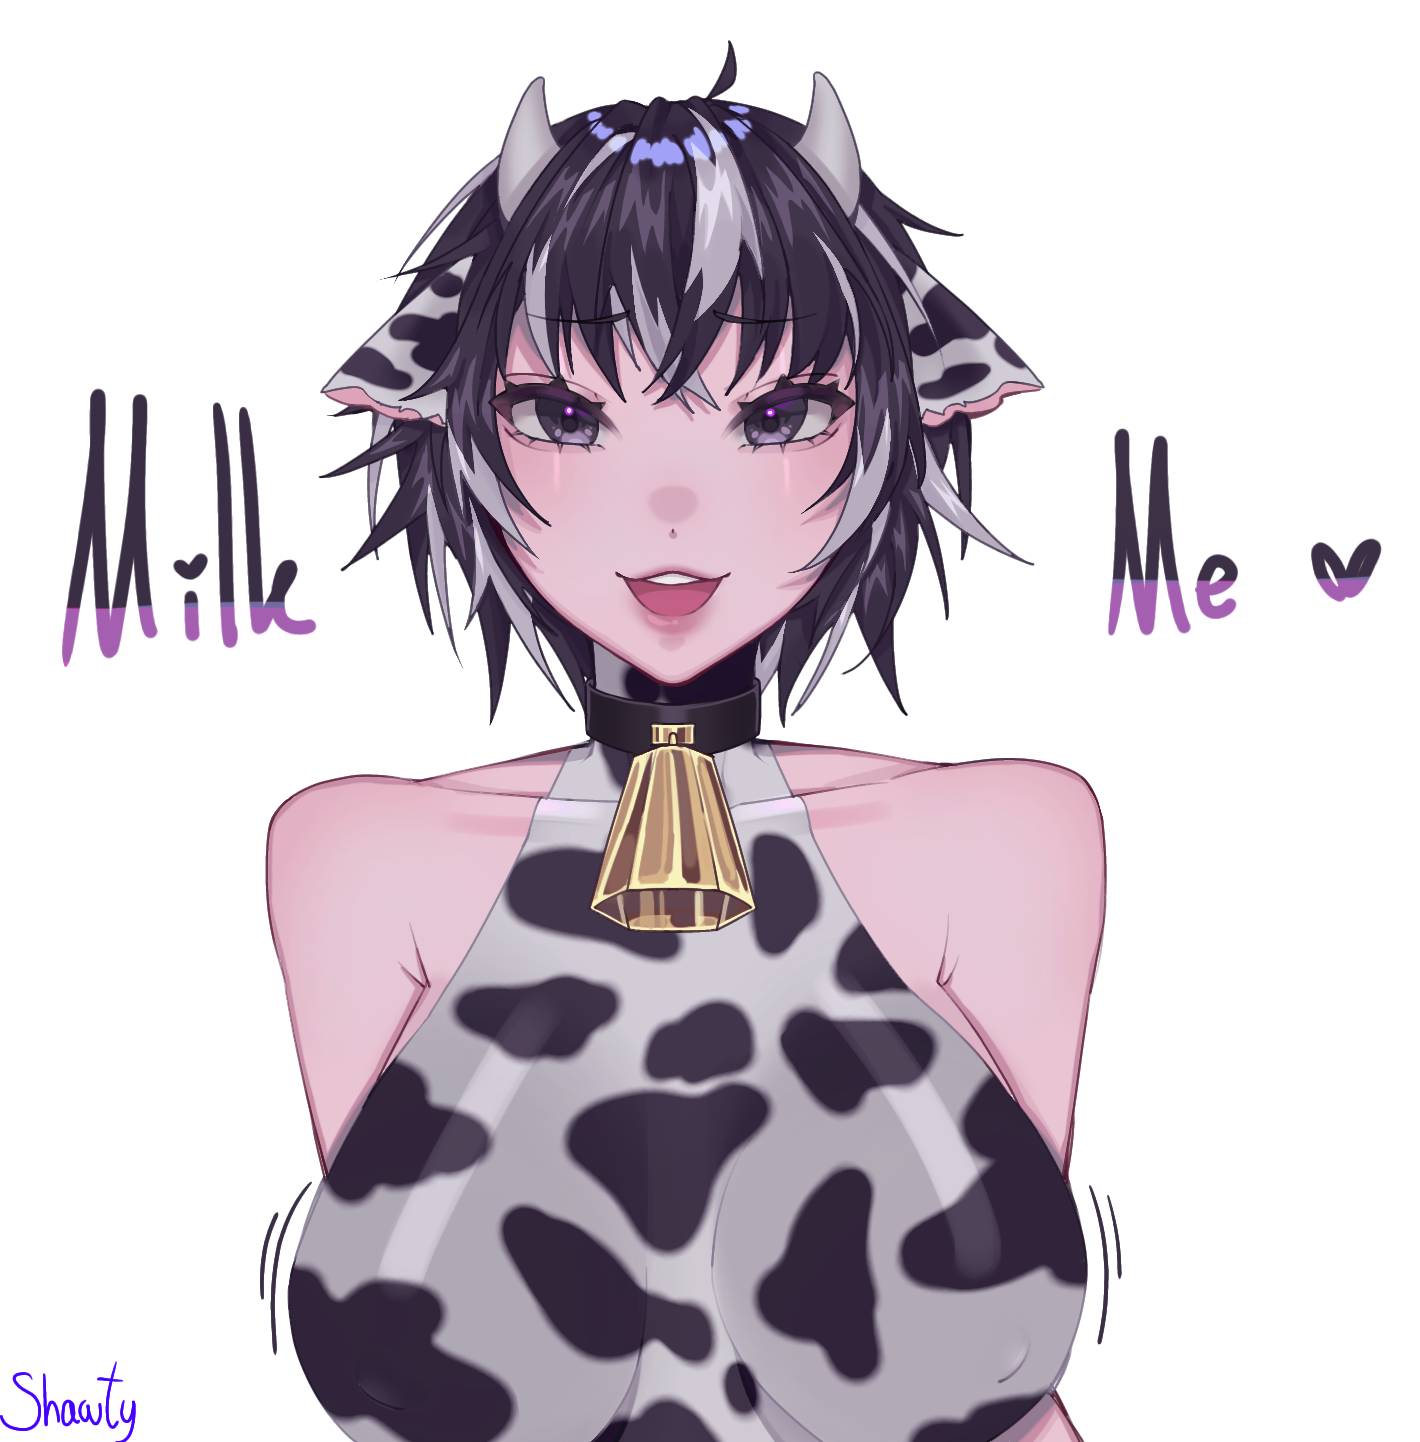 Cow girl by Shawty007 on DeviantArt